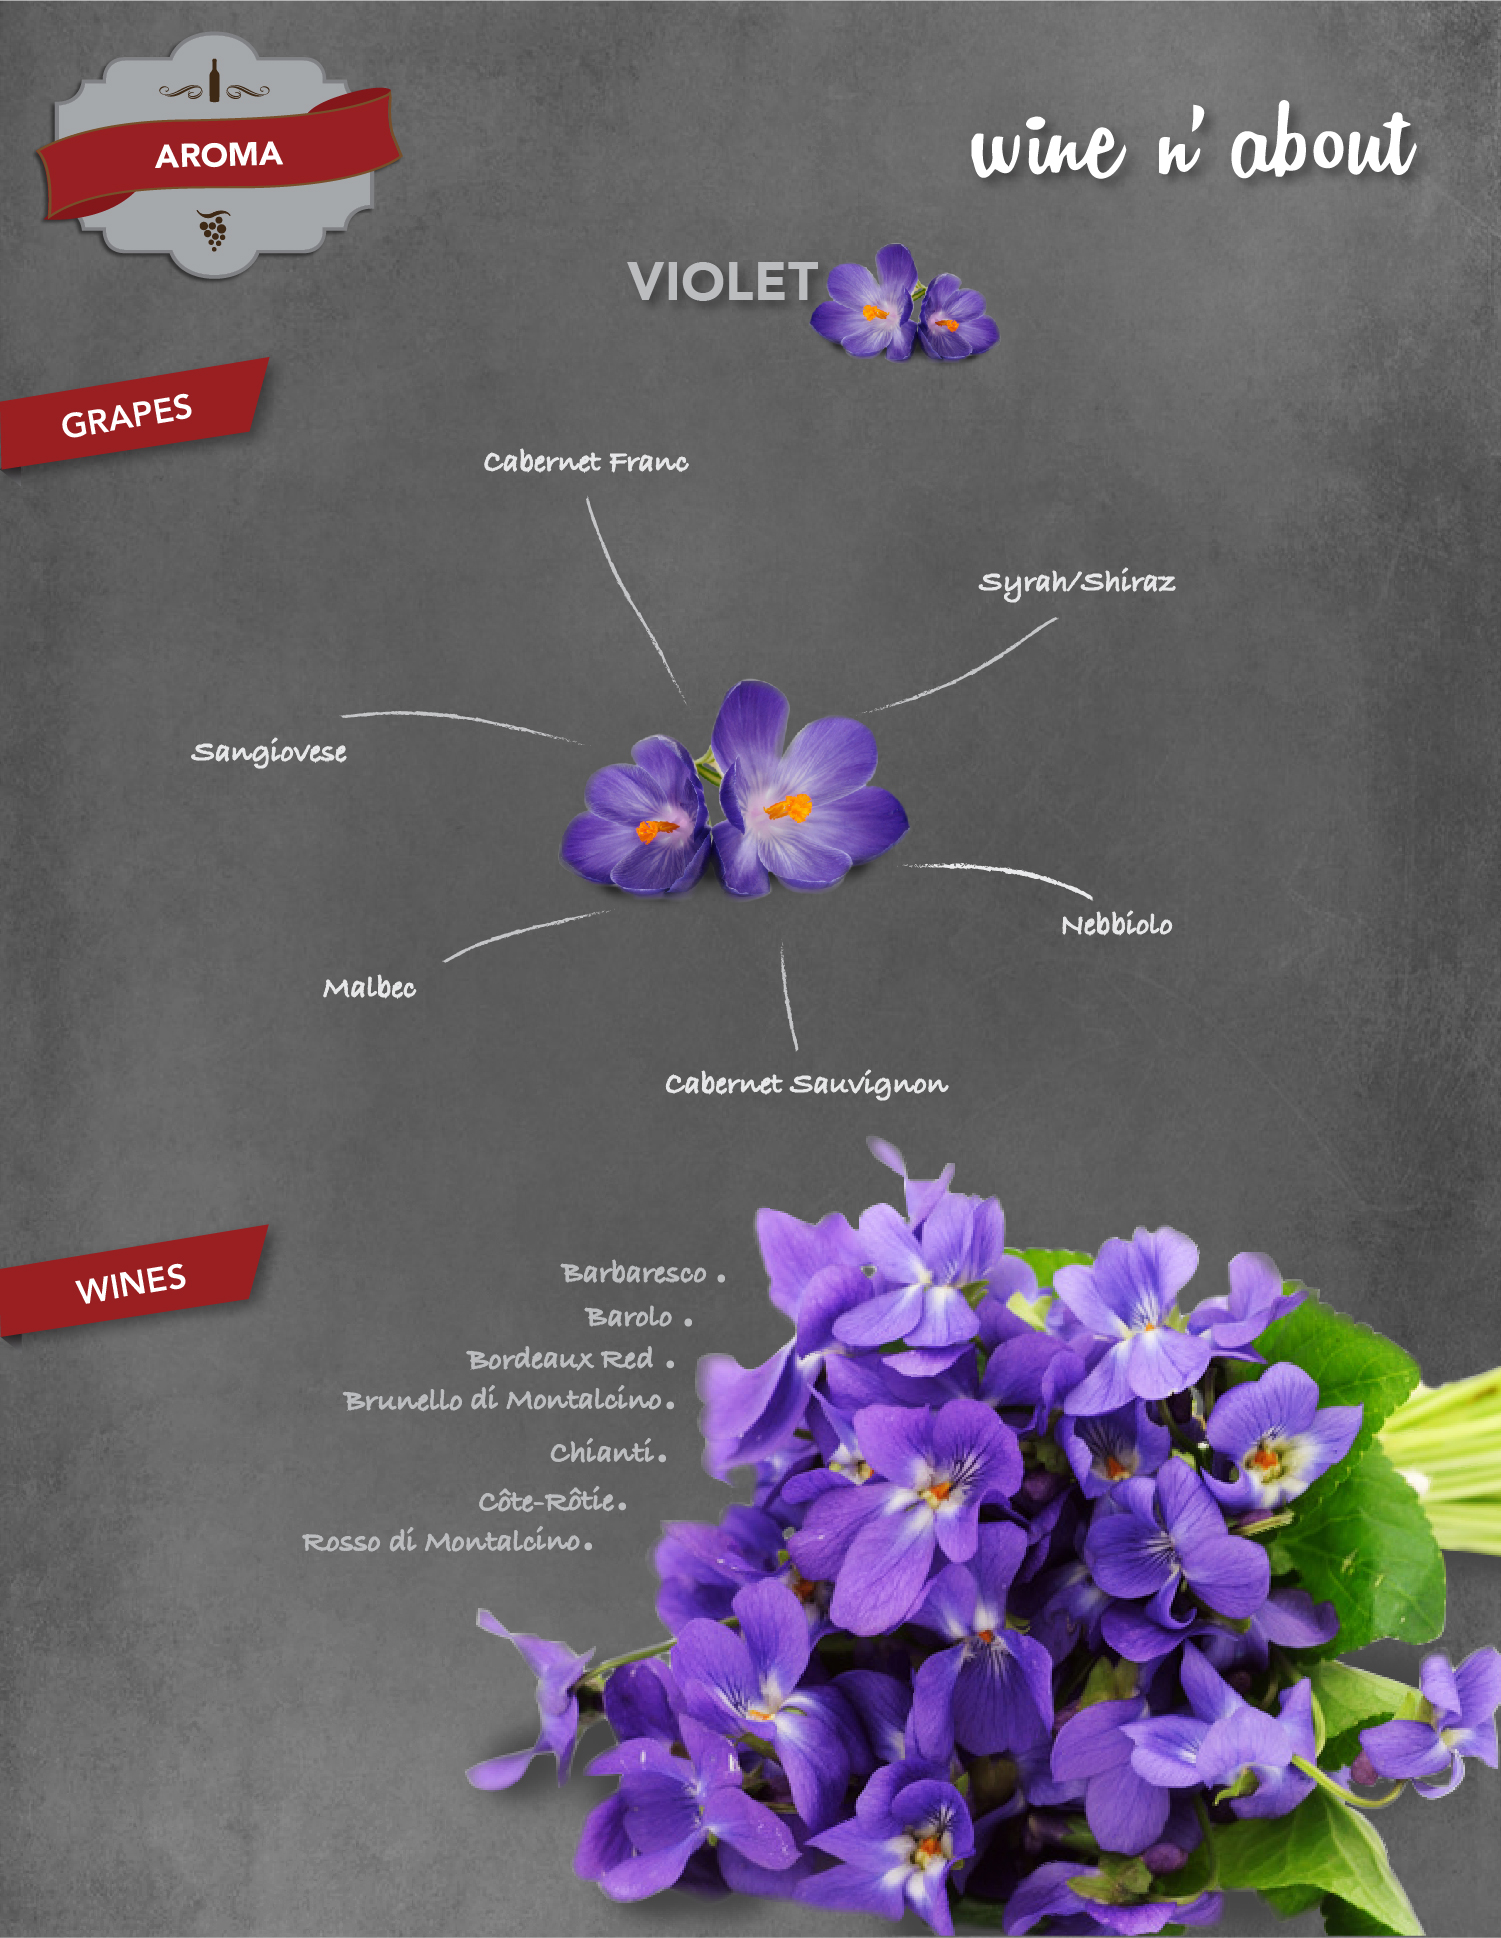 Violet Aroma by Wine n' about